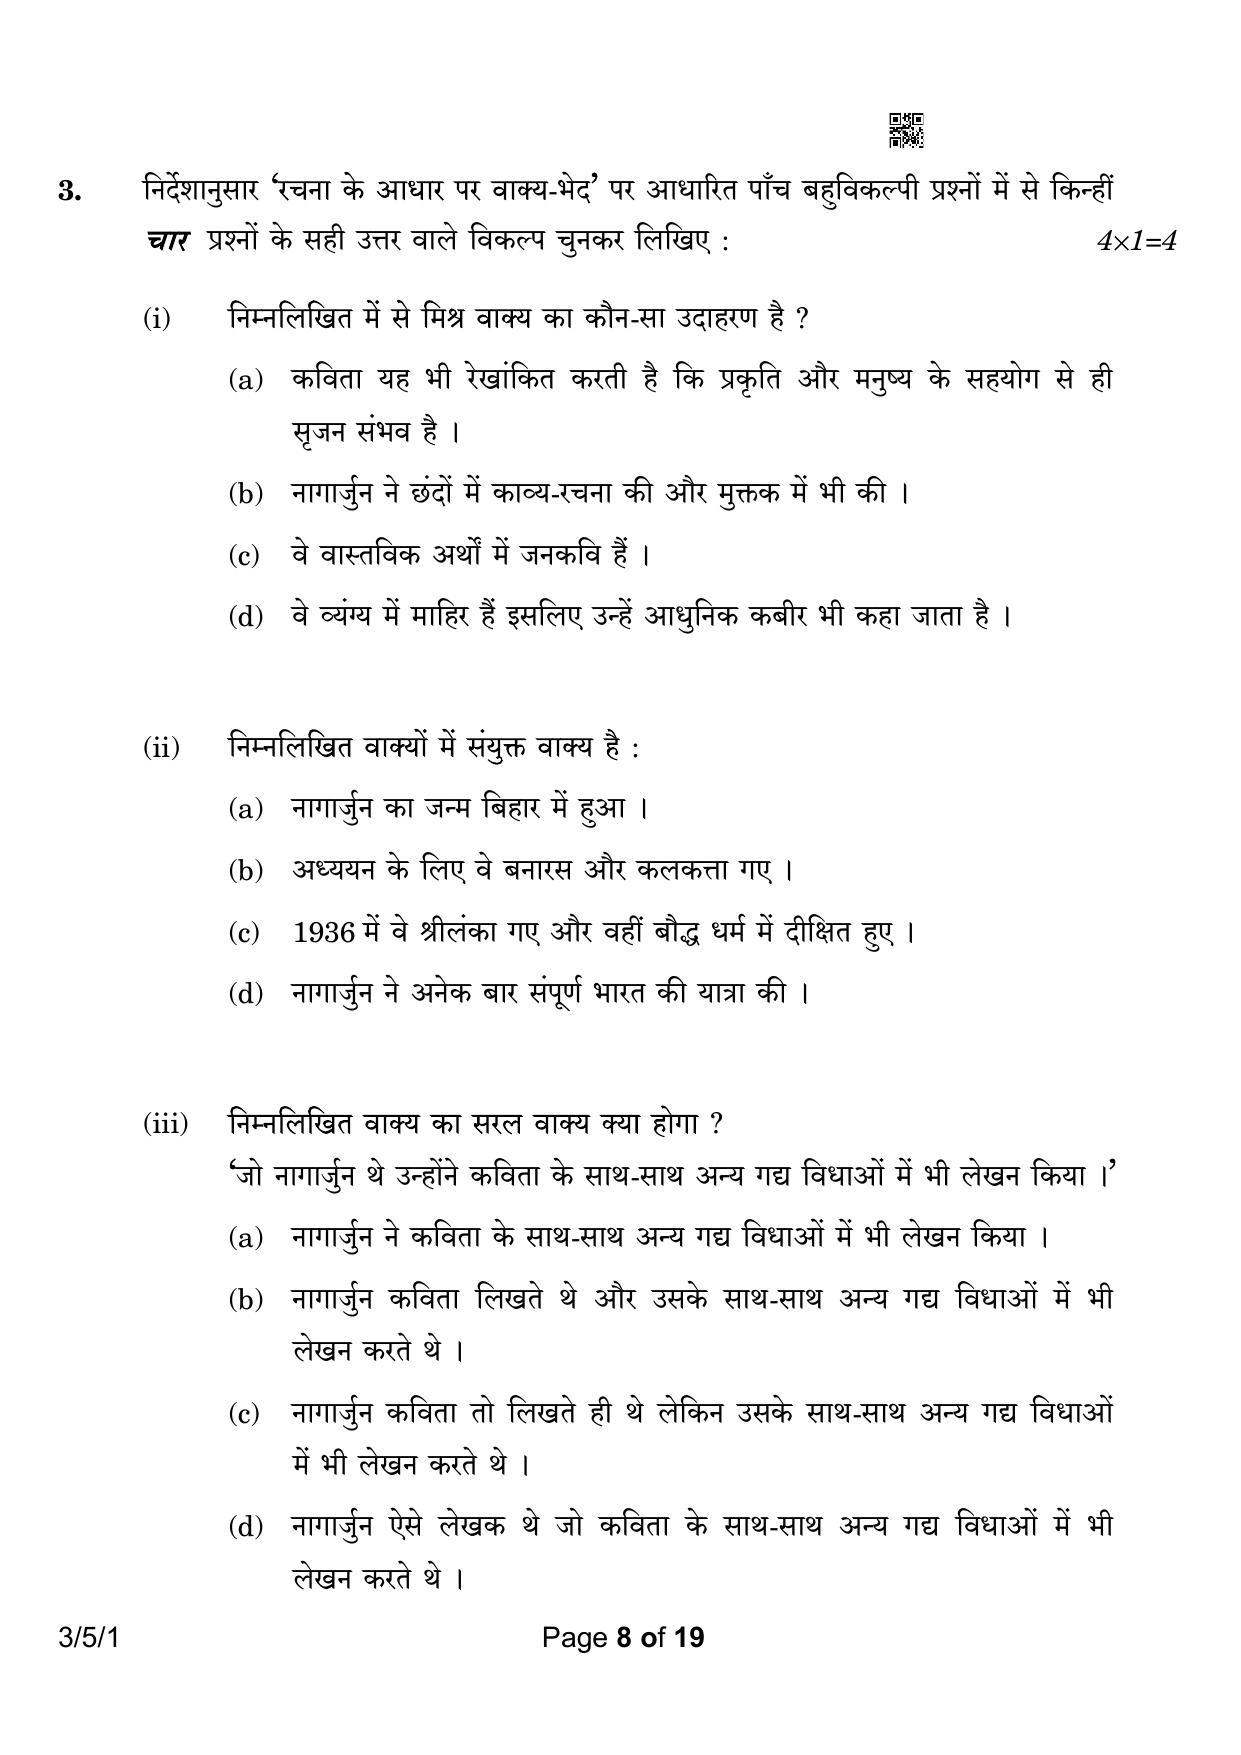 CBSE Class 10 3-5-1 Hindi A 2023 Question Paper - Page 8